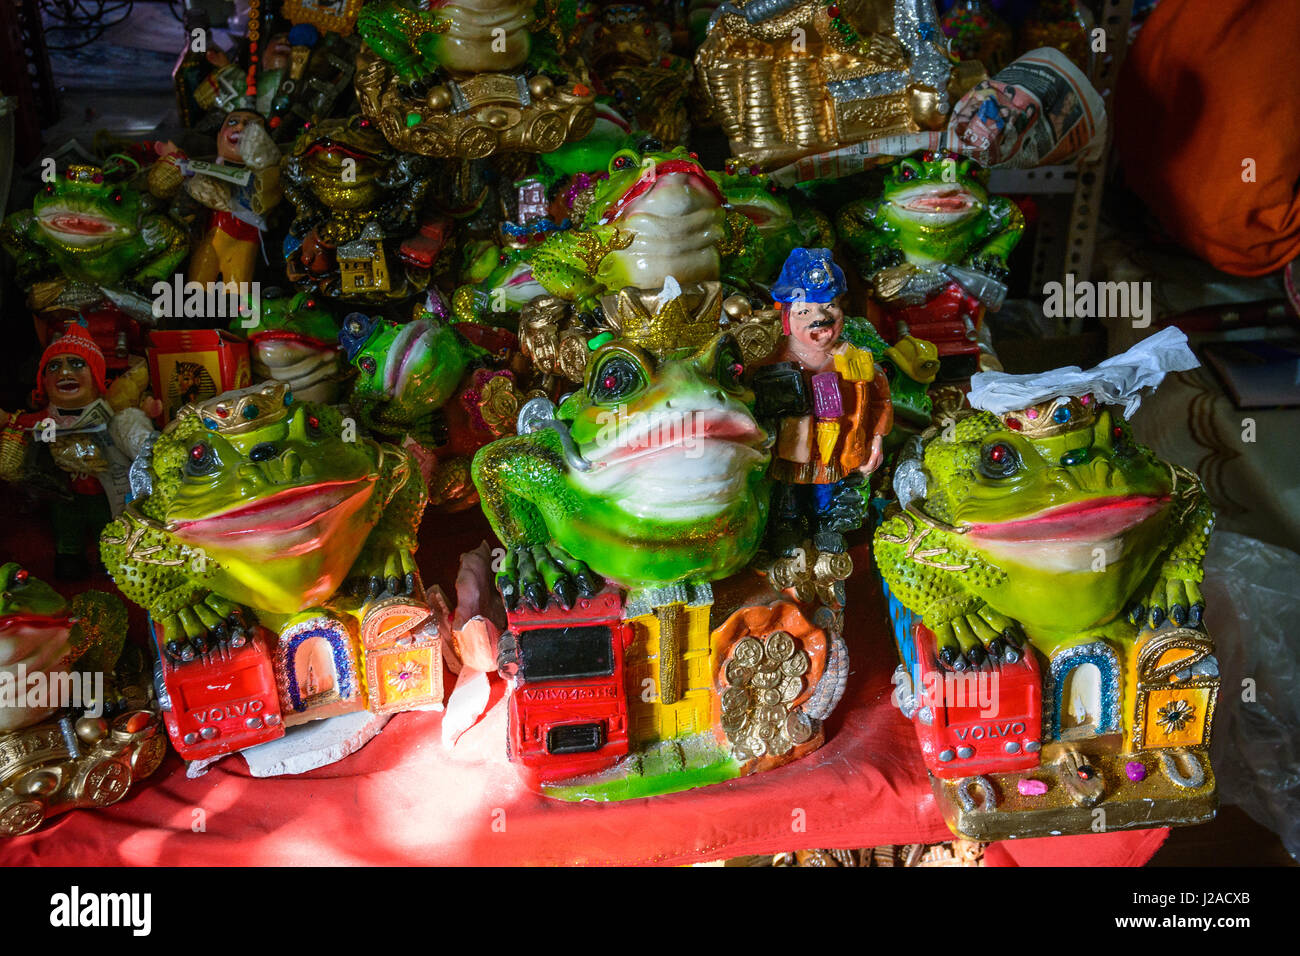 Bolivia, Departamento de La Paz, La Paz, witching market with lucky charms and magical accessories Stock Photo